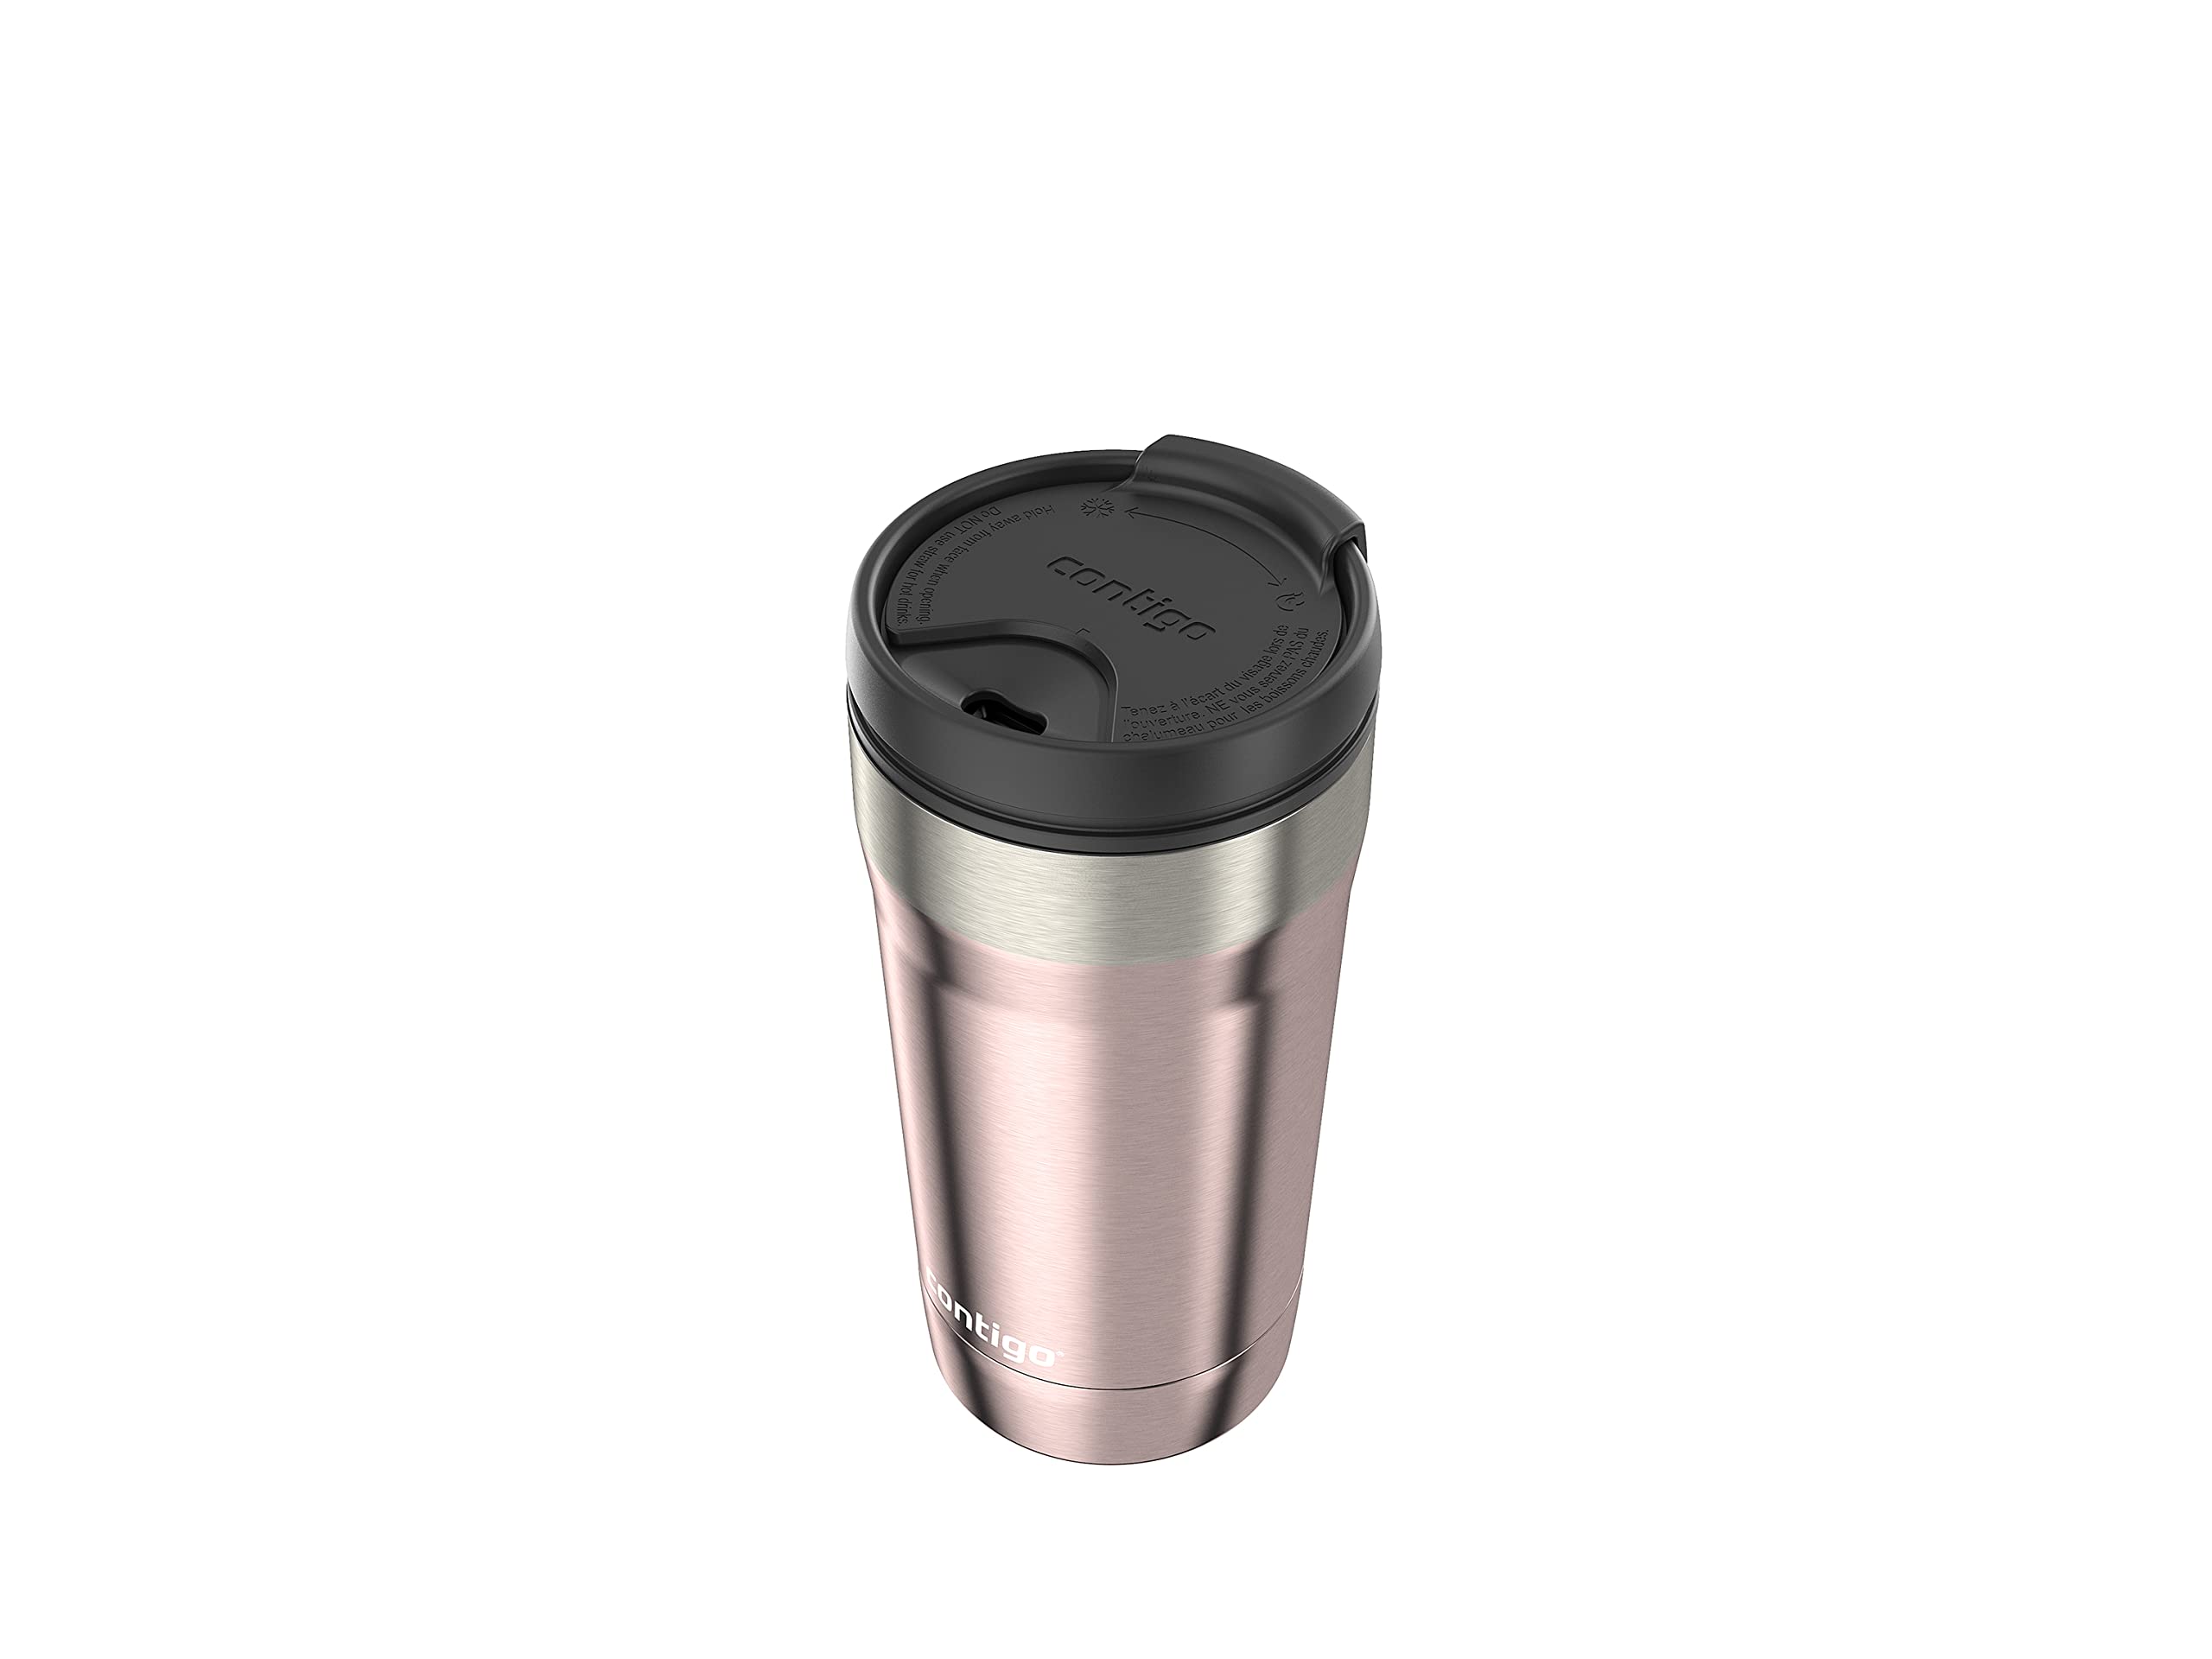 Contigo Uptown Dual-Sip Stainless Steel Tumbler with Leakproof Lid, Insulated Body Keeps Drinks Hot & Cold for Hours, Sip Cold Drinks Through Straw & Hot Drinks Through Spout, 16oz Macchiato